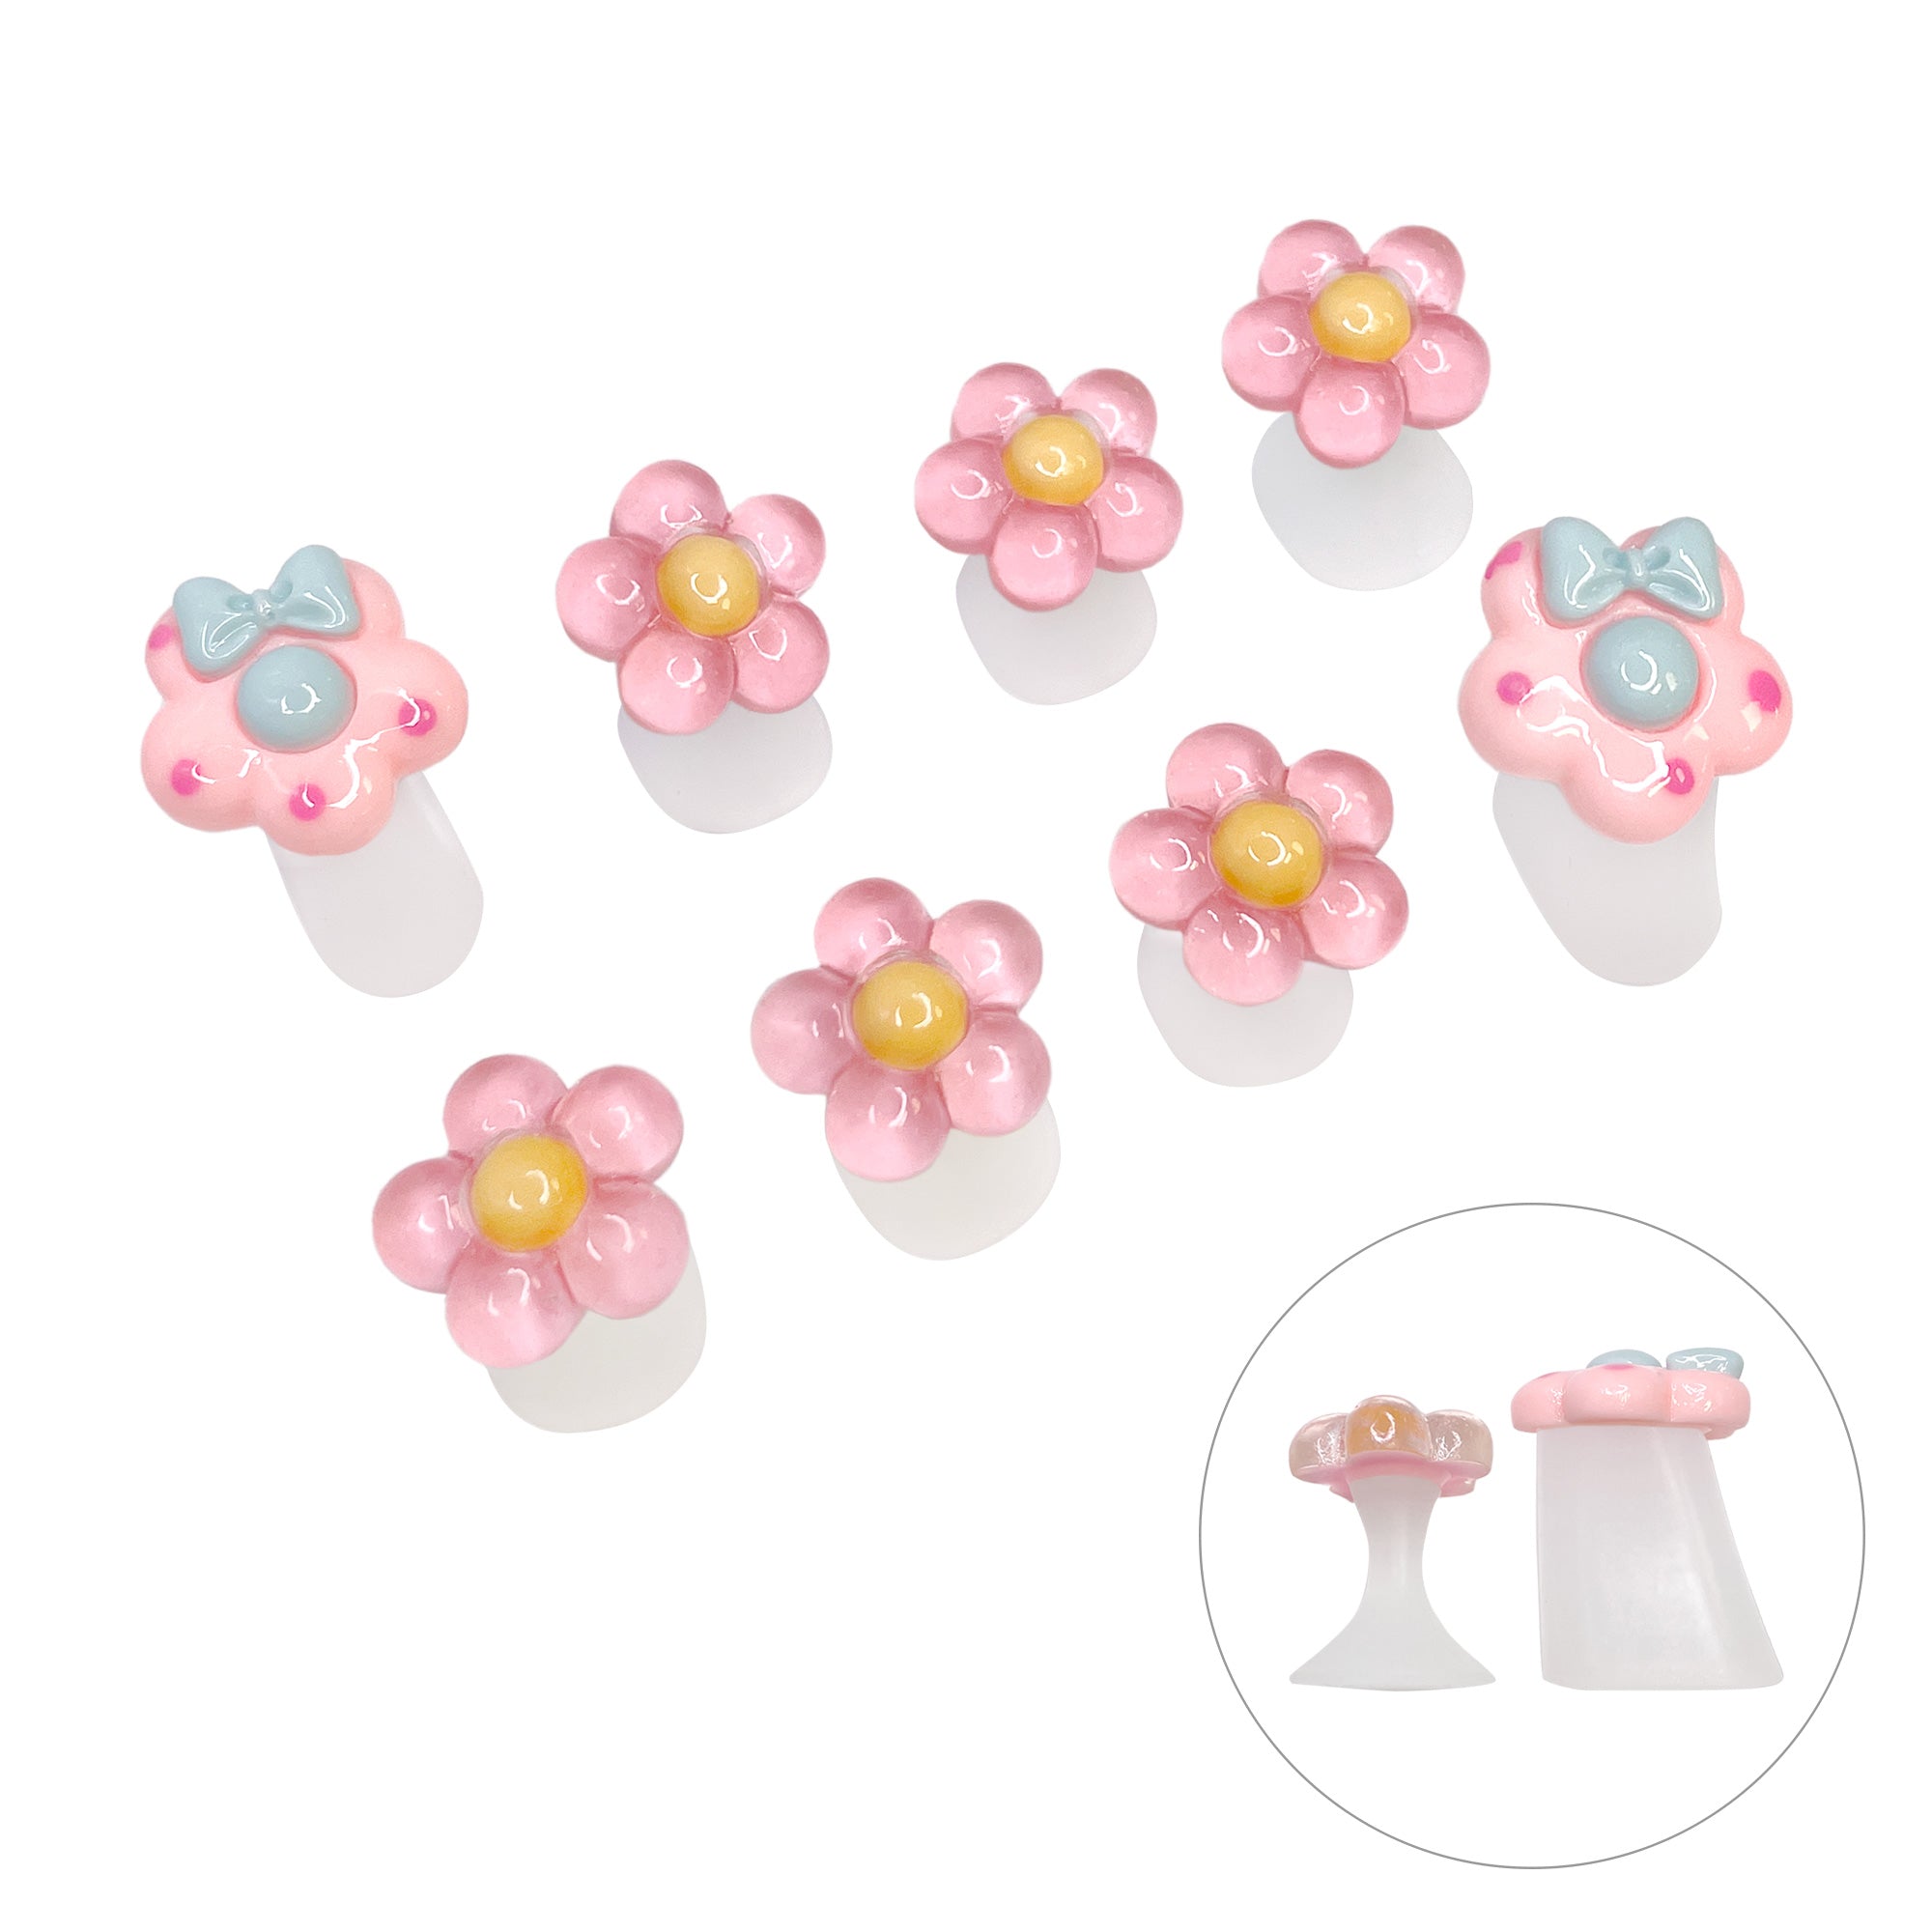 Soft Silicone Pedicure Toe Separator Set / Pink Flower Divider Spacer Nail Feet